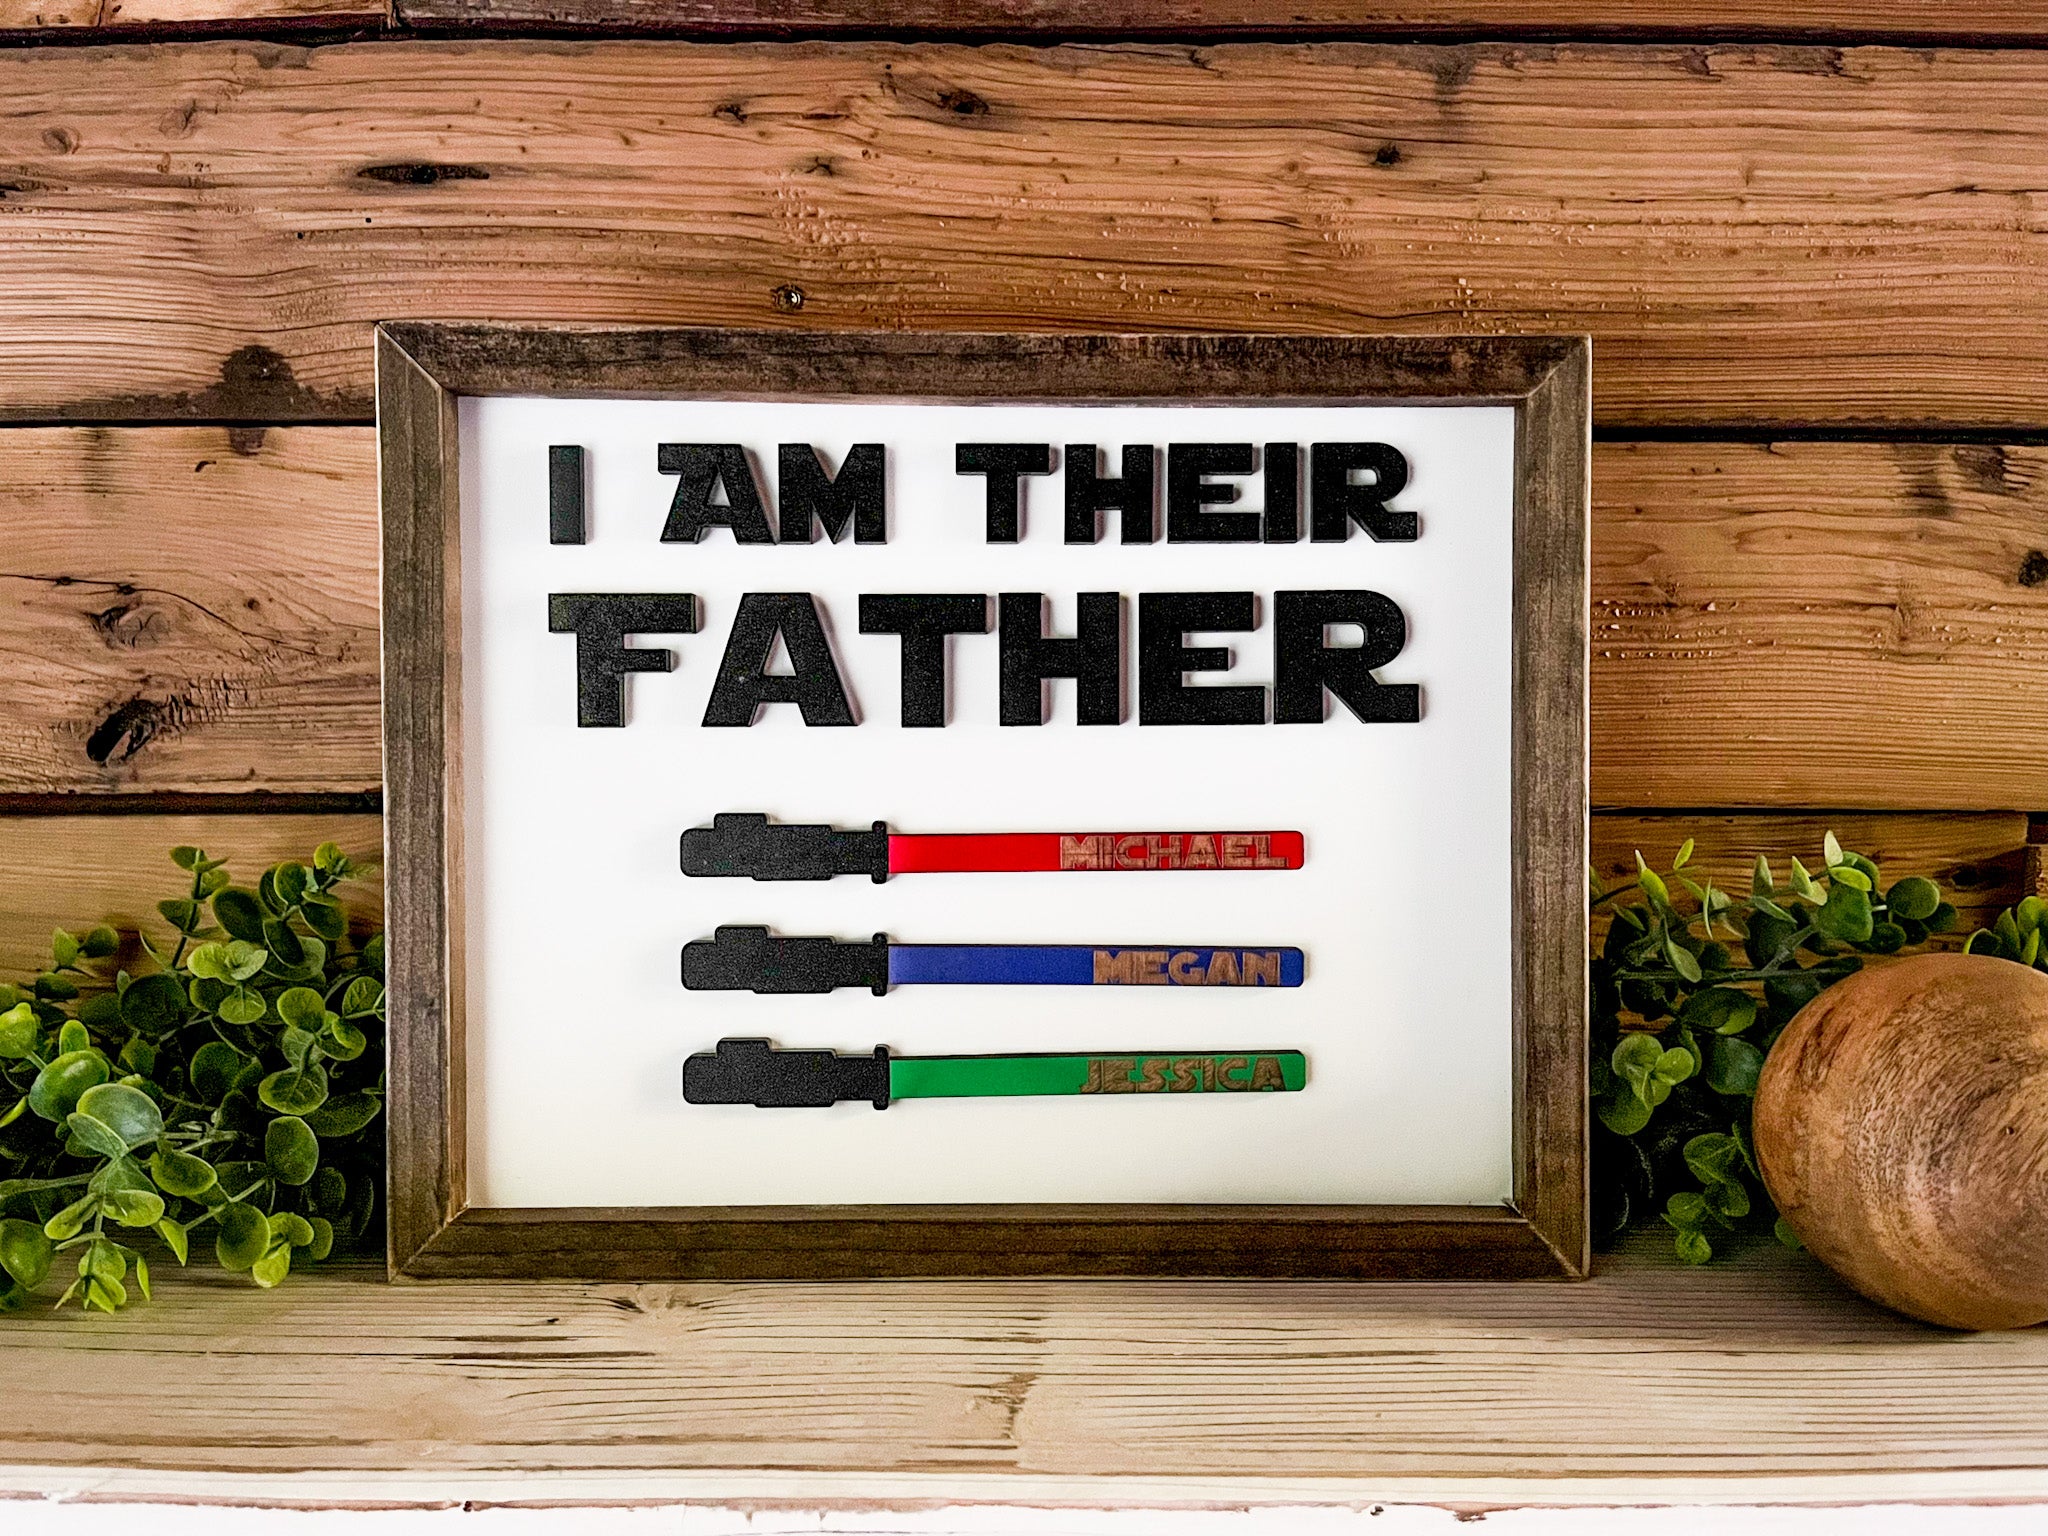 Star Wars Gift Ideas for Adults star wars gift for dad star wars